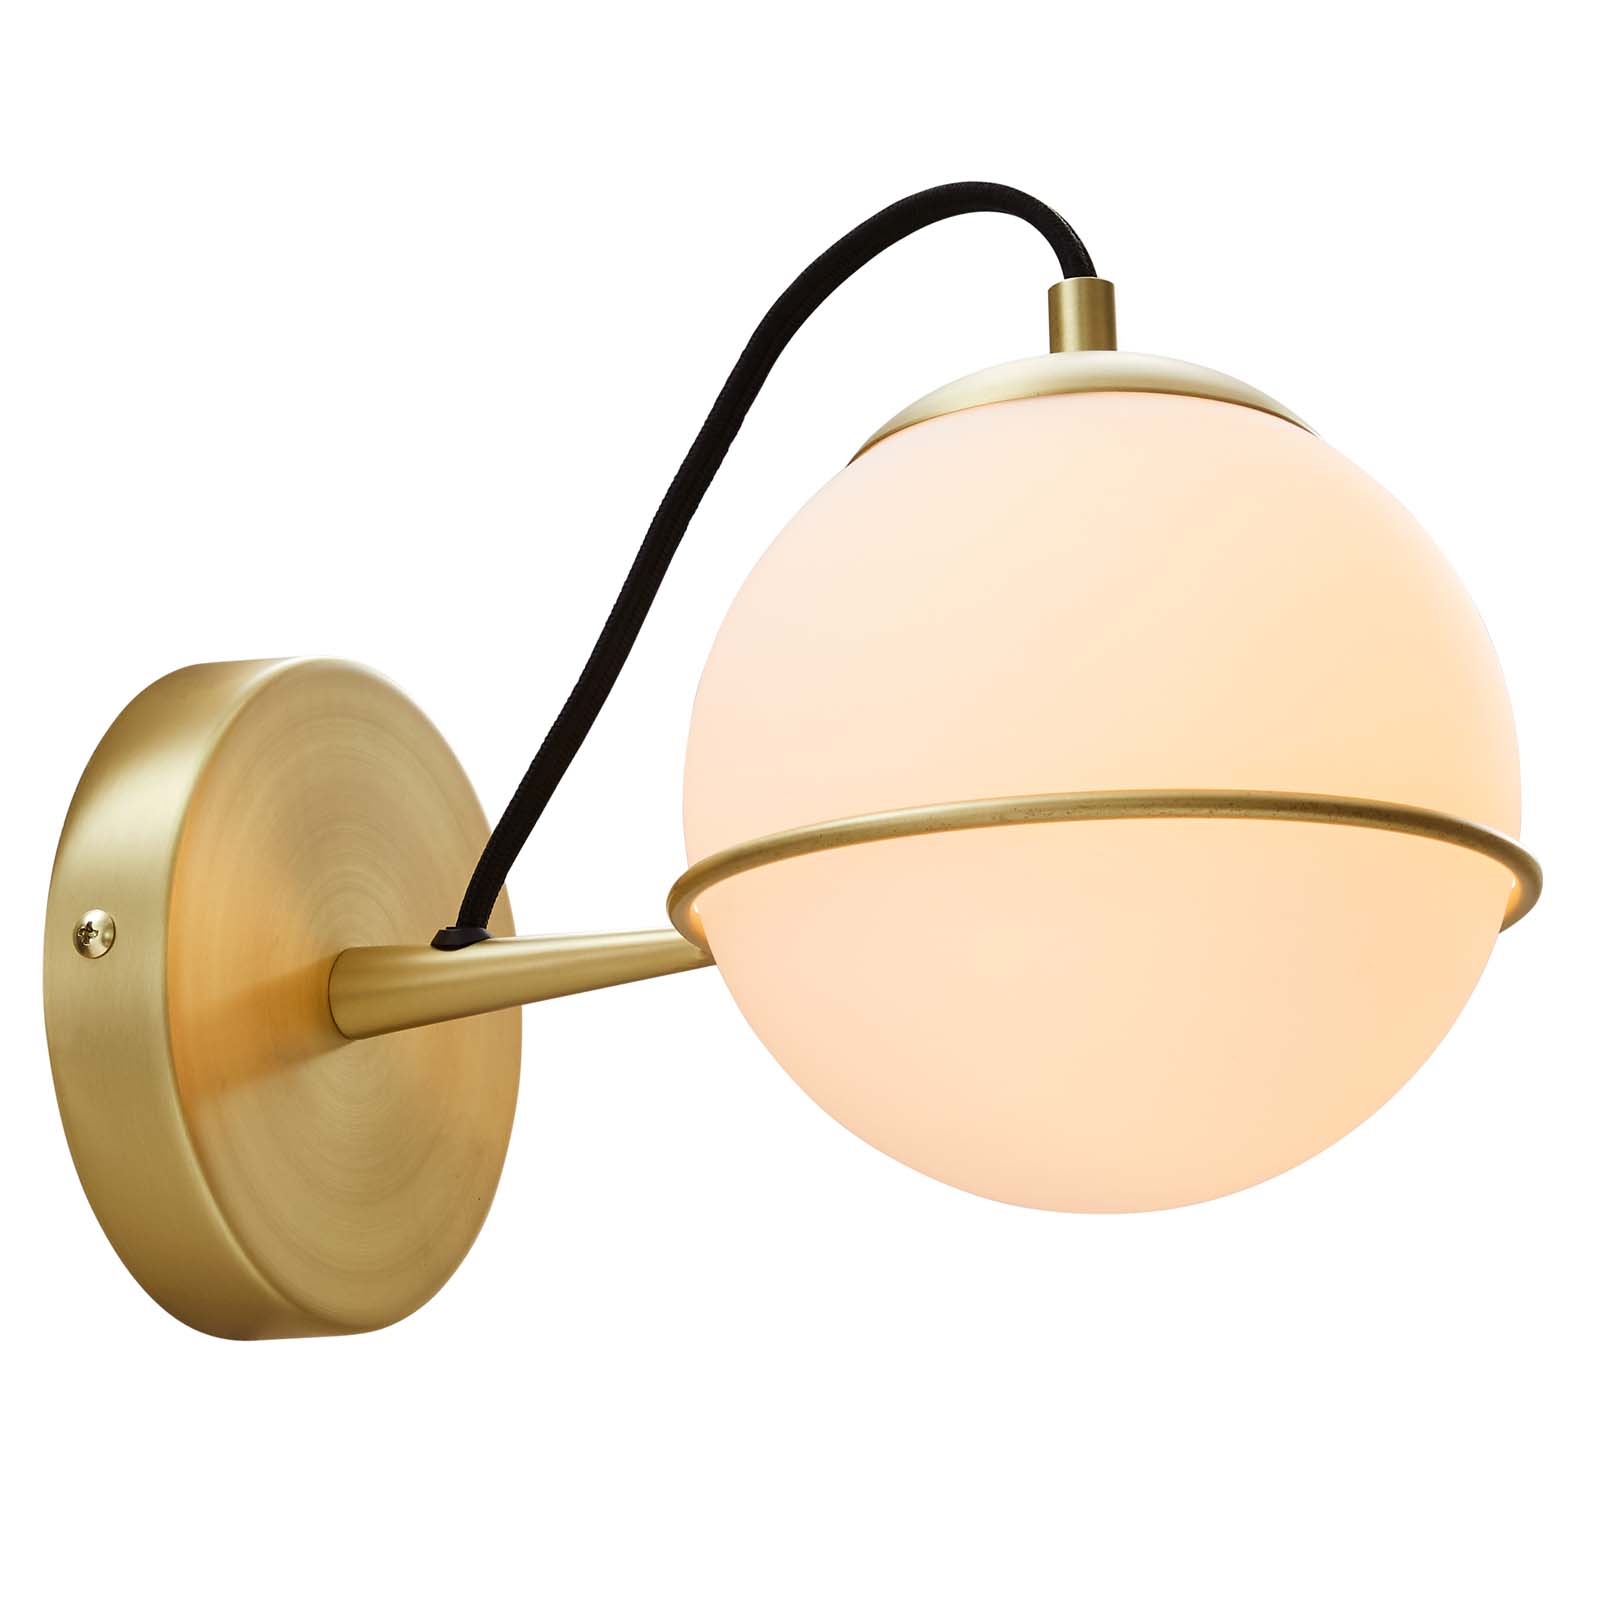 Hanna Hardwire Wall Sconce in Opal Gold